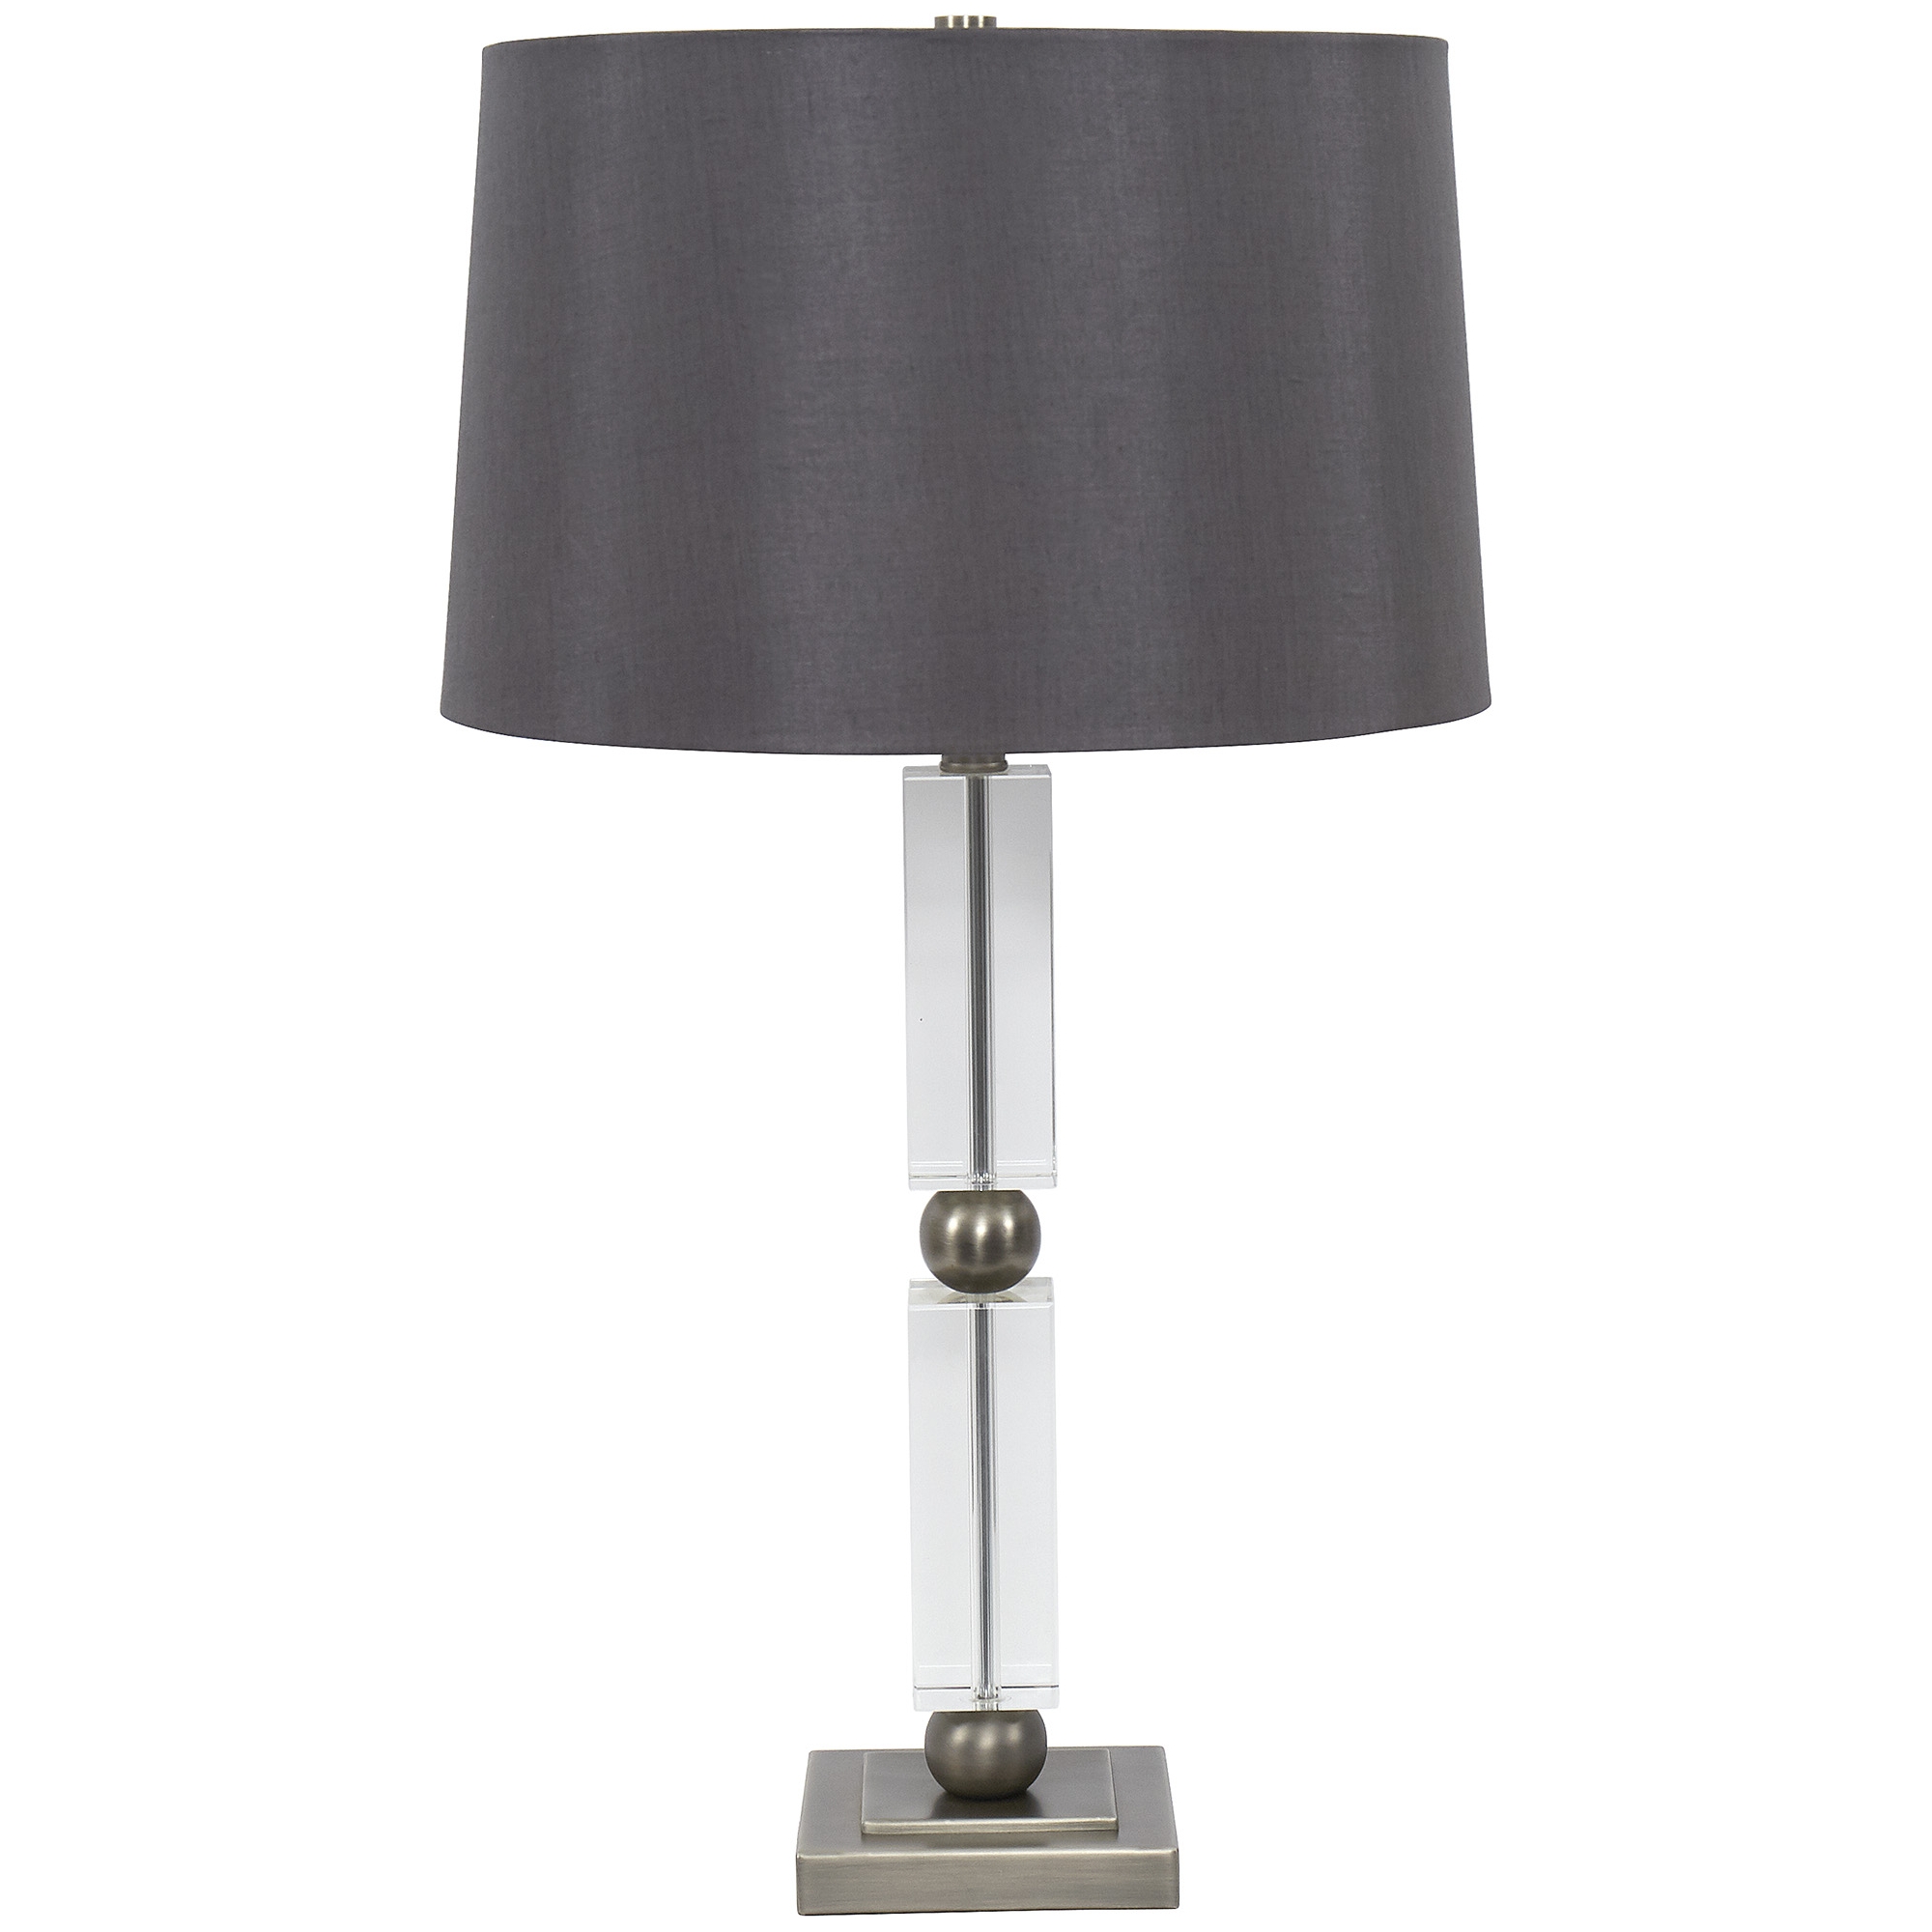 Monroe Table Lamp Find The Perfect, Monroe Table Lamp